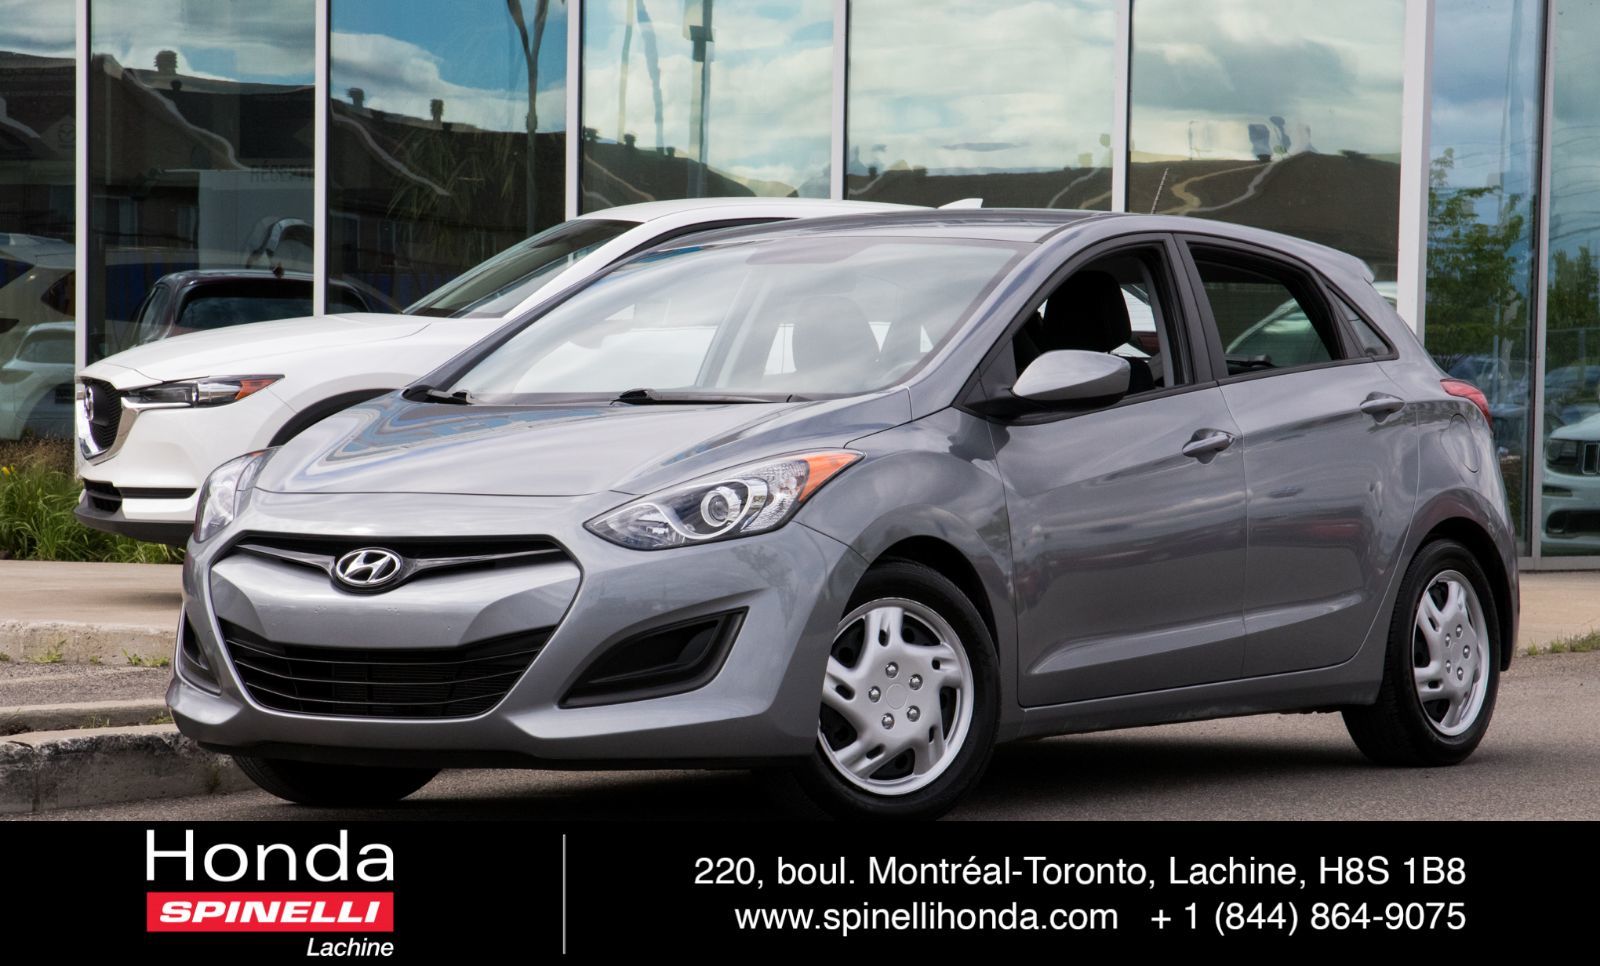 Used 14 Hyundai Elantra Gt Auto Cruise Deal Pending For Sale In Montreal Hb Spinelli Honda Lachine